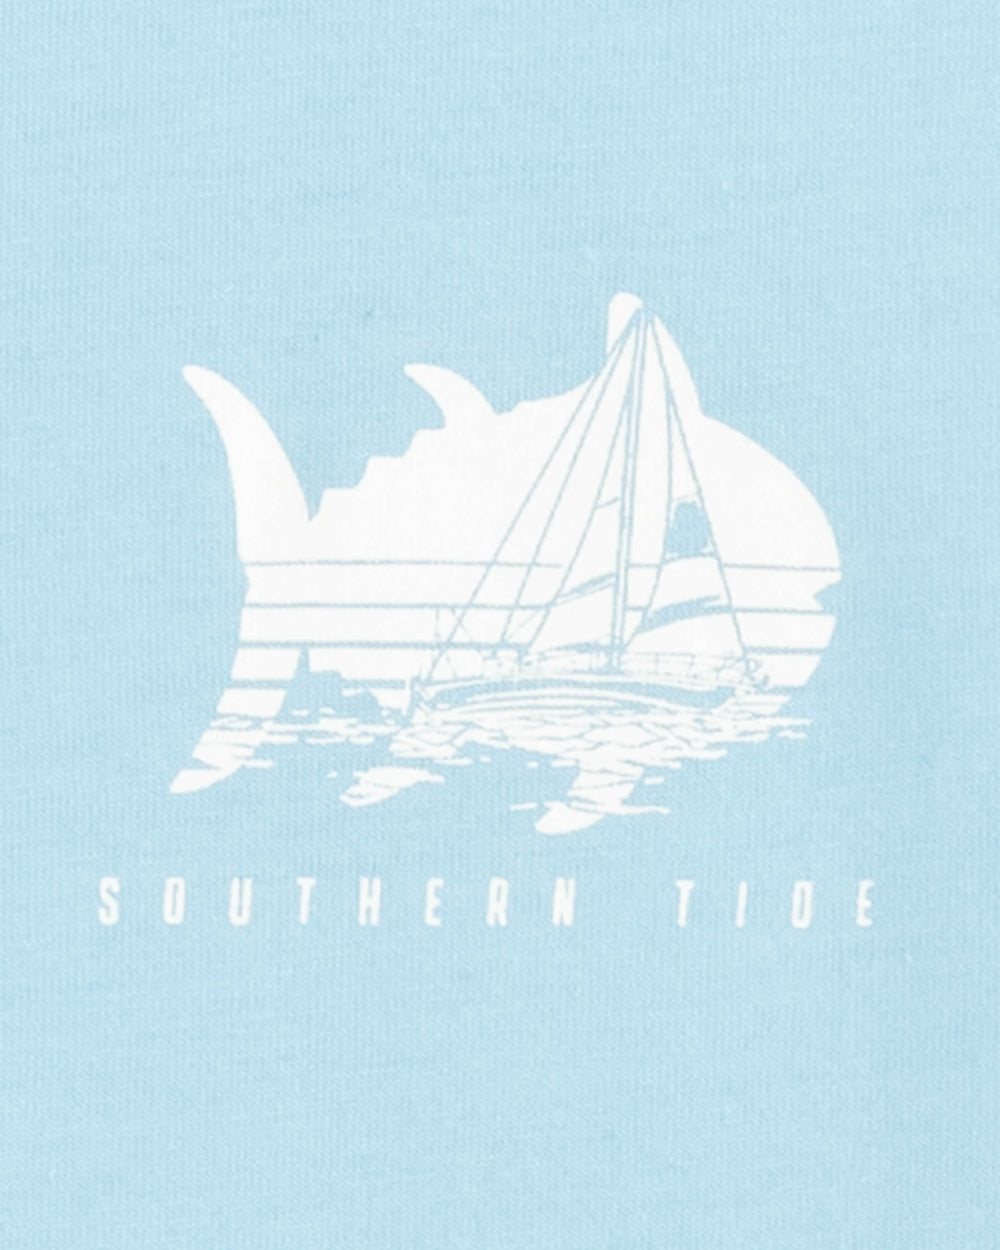 The detail view of the Southern Tide Southern Sailing Long Sleeve T-Shirt by Southern Tide - Rain Water